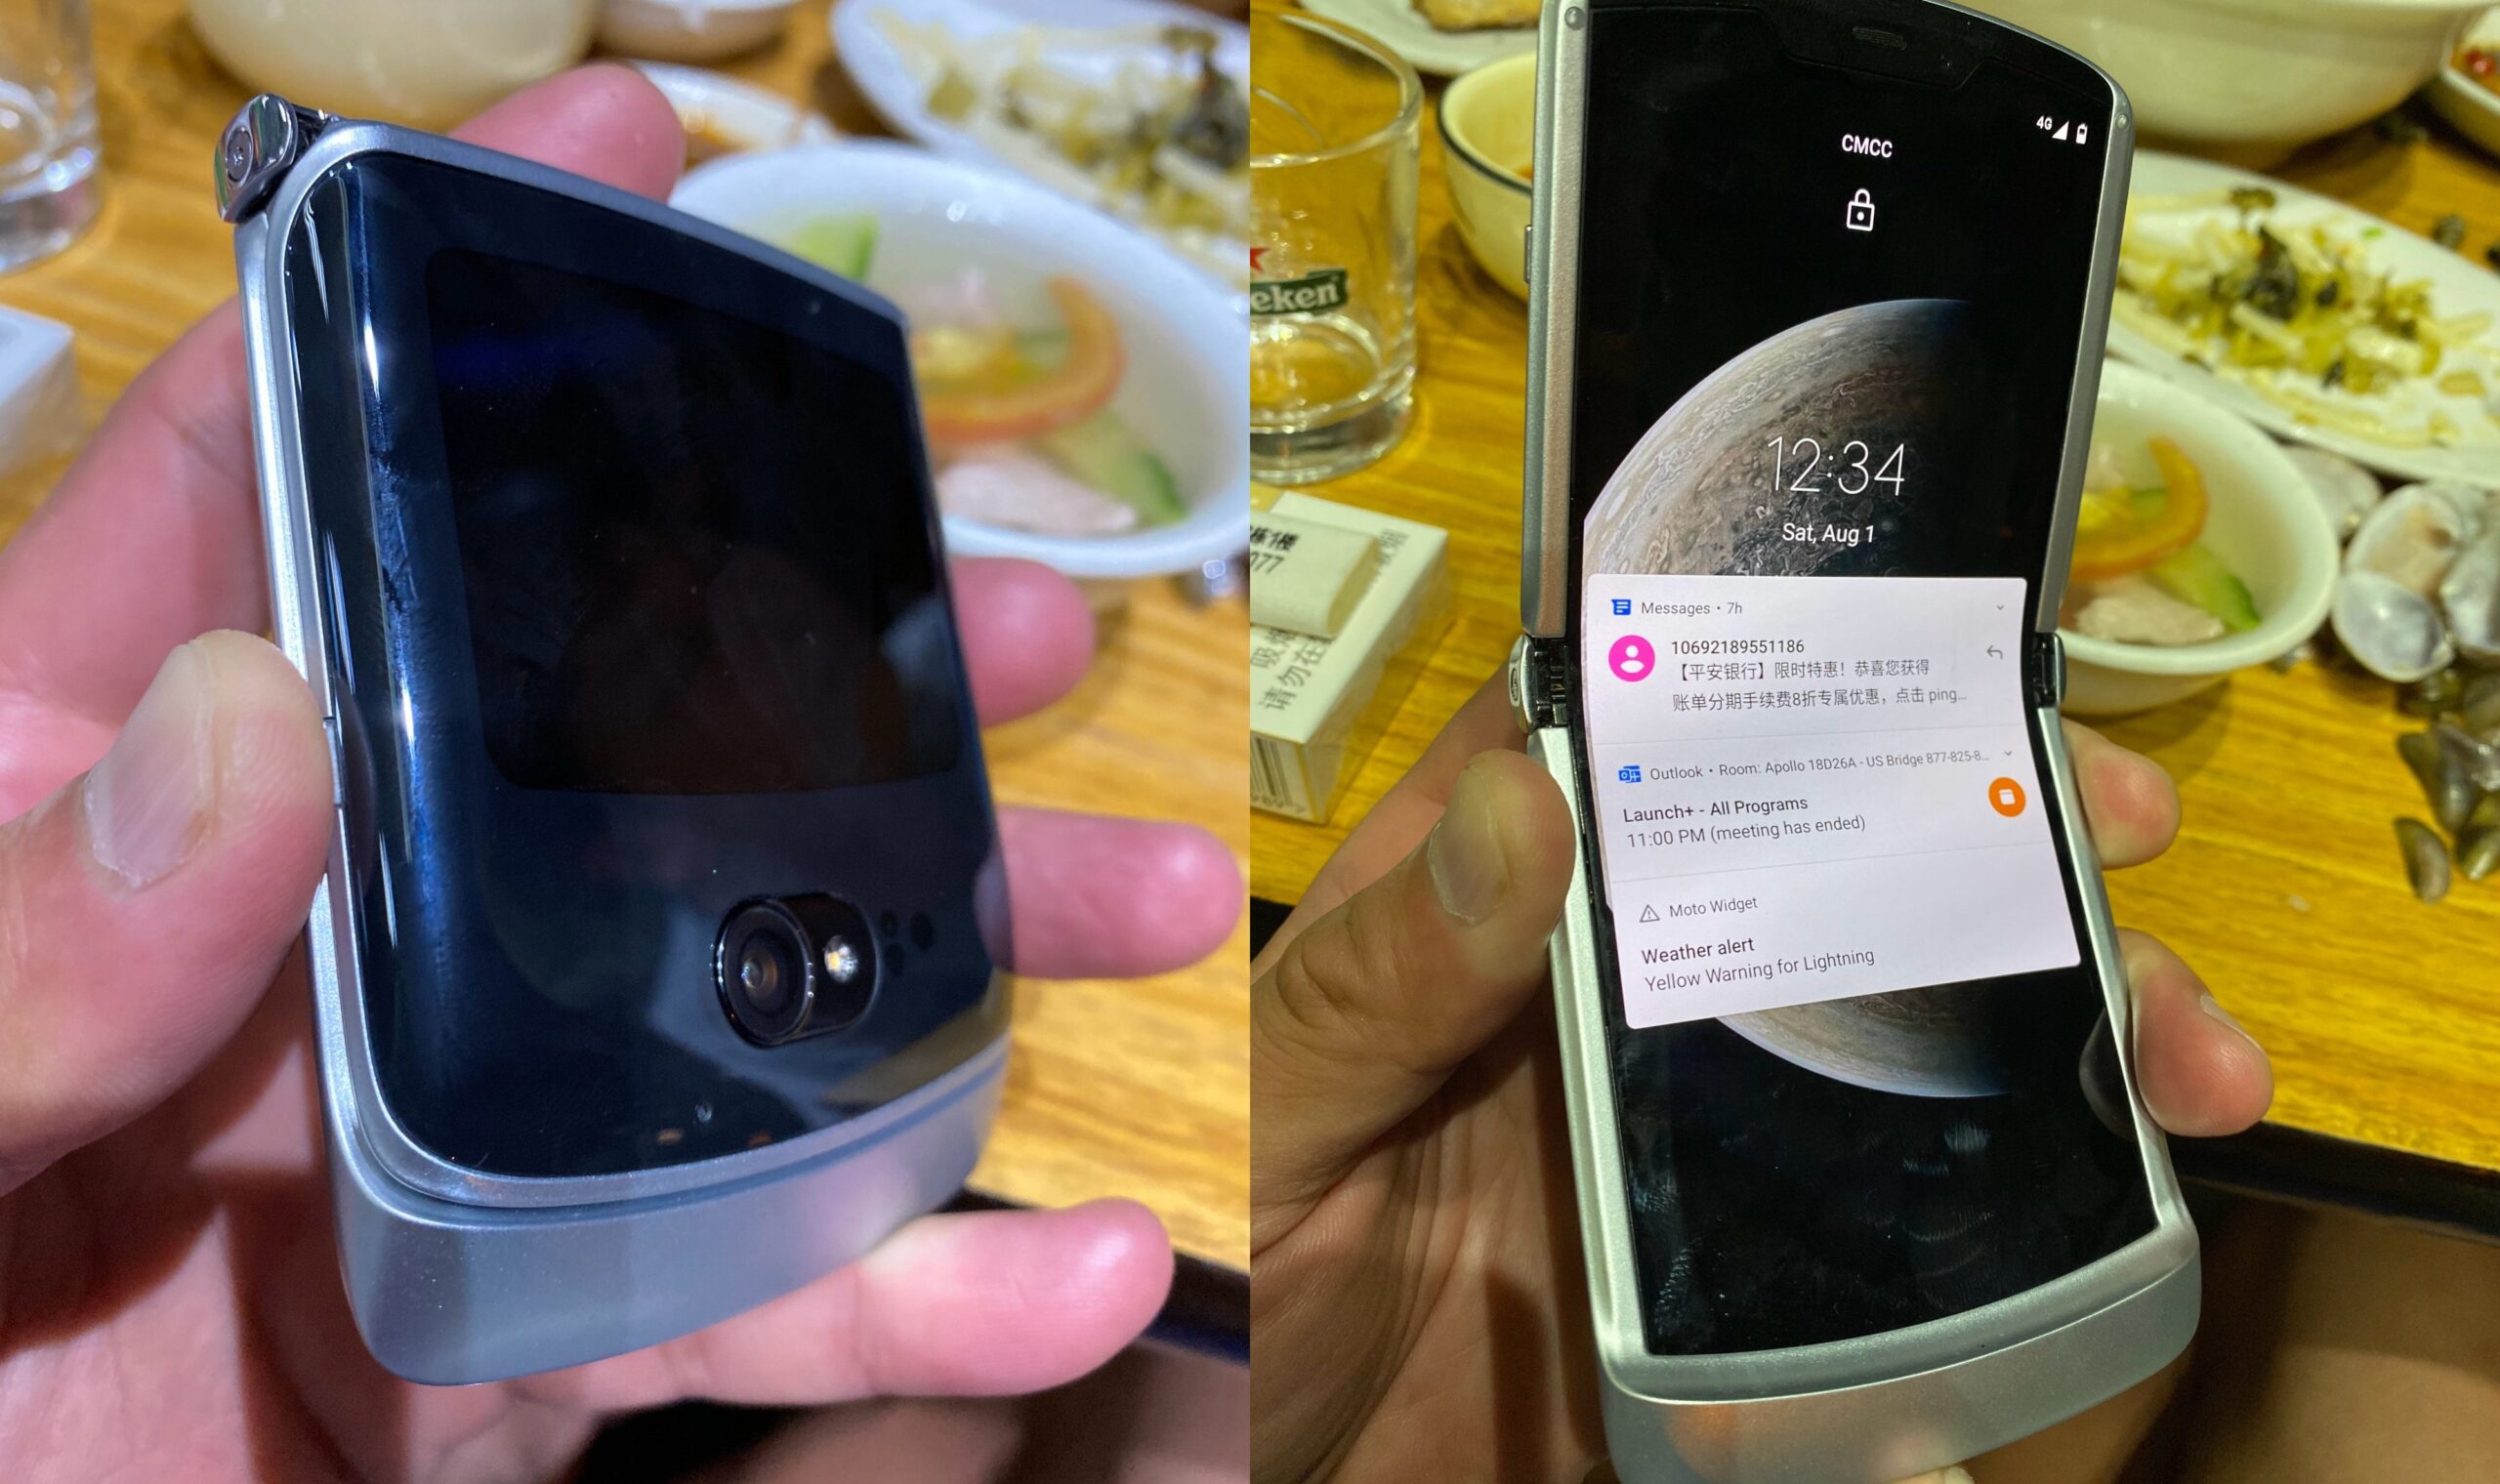 A Chinese investor shares images of unreleased Motorola razr 5G